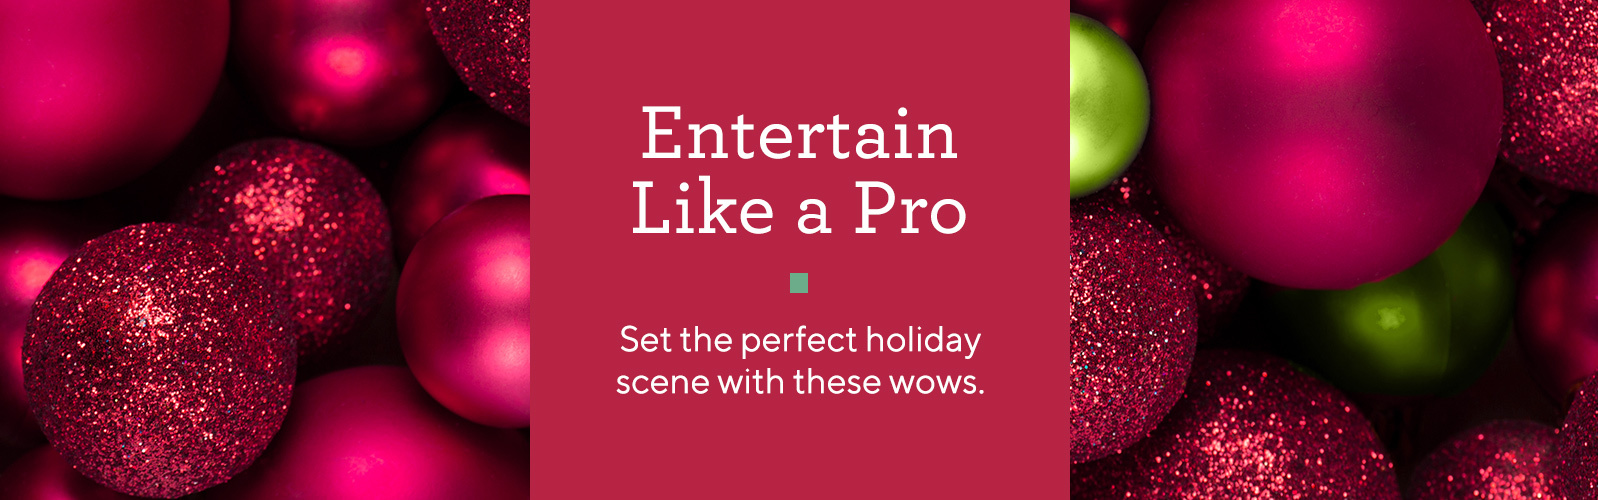 Entertain Like a Pro  Set the perfect holiday scene with these wows. 